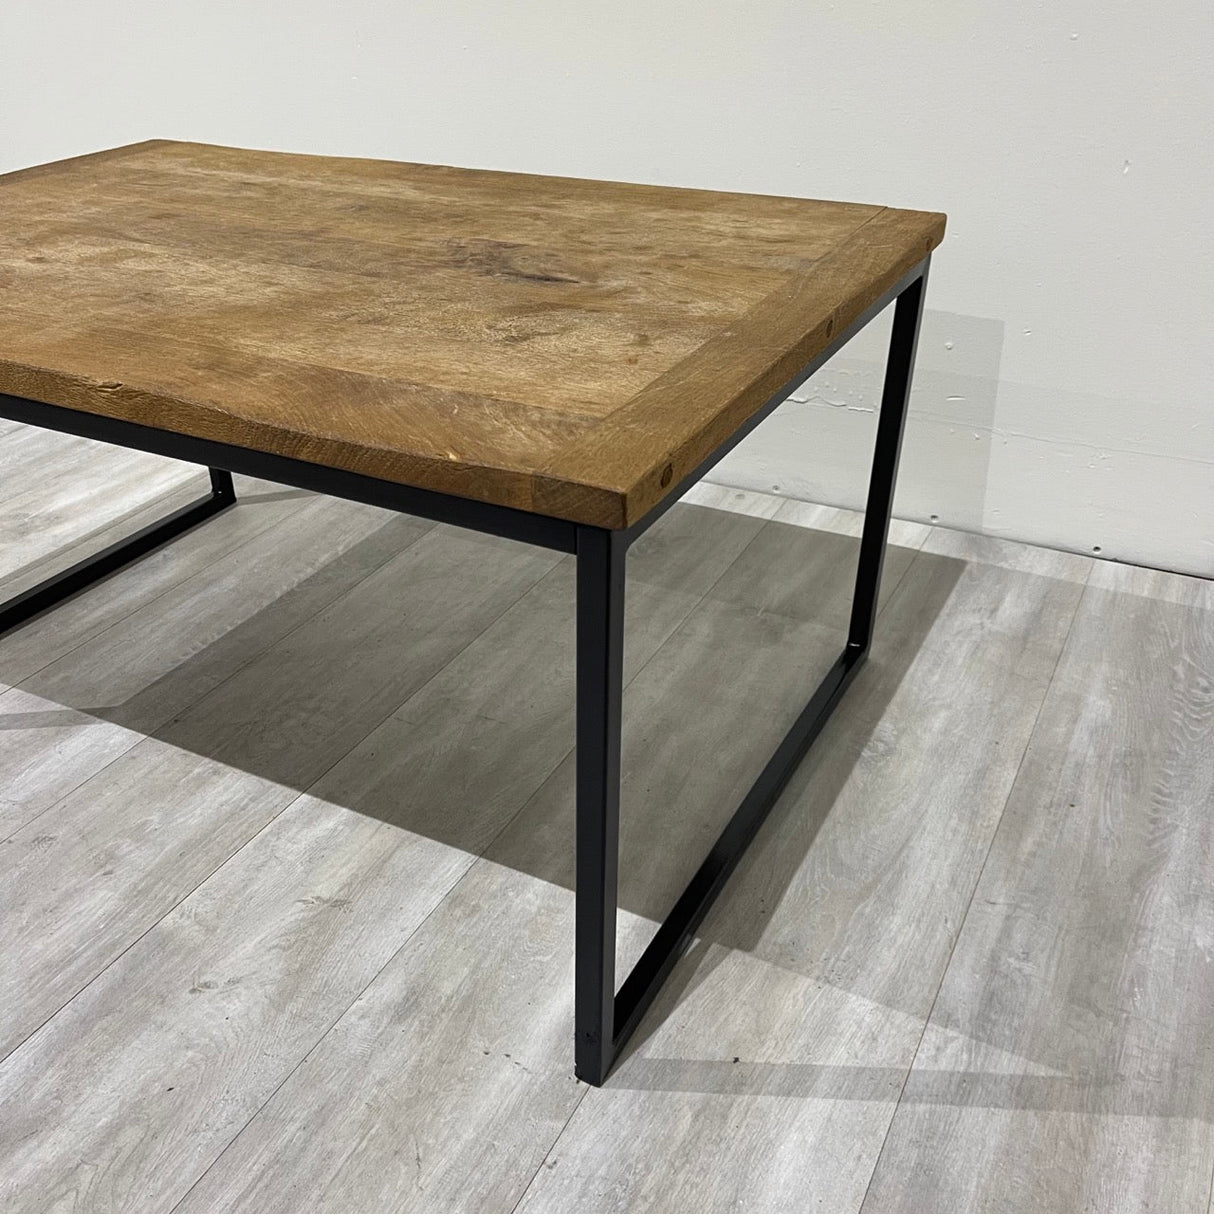 Pottery Born Reclaimed Wood Coffee Table - enliven mart